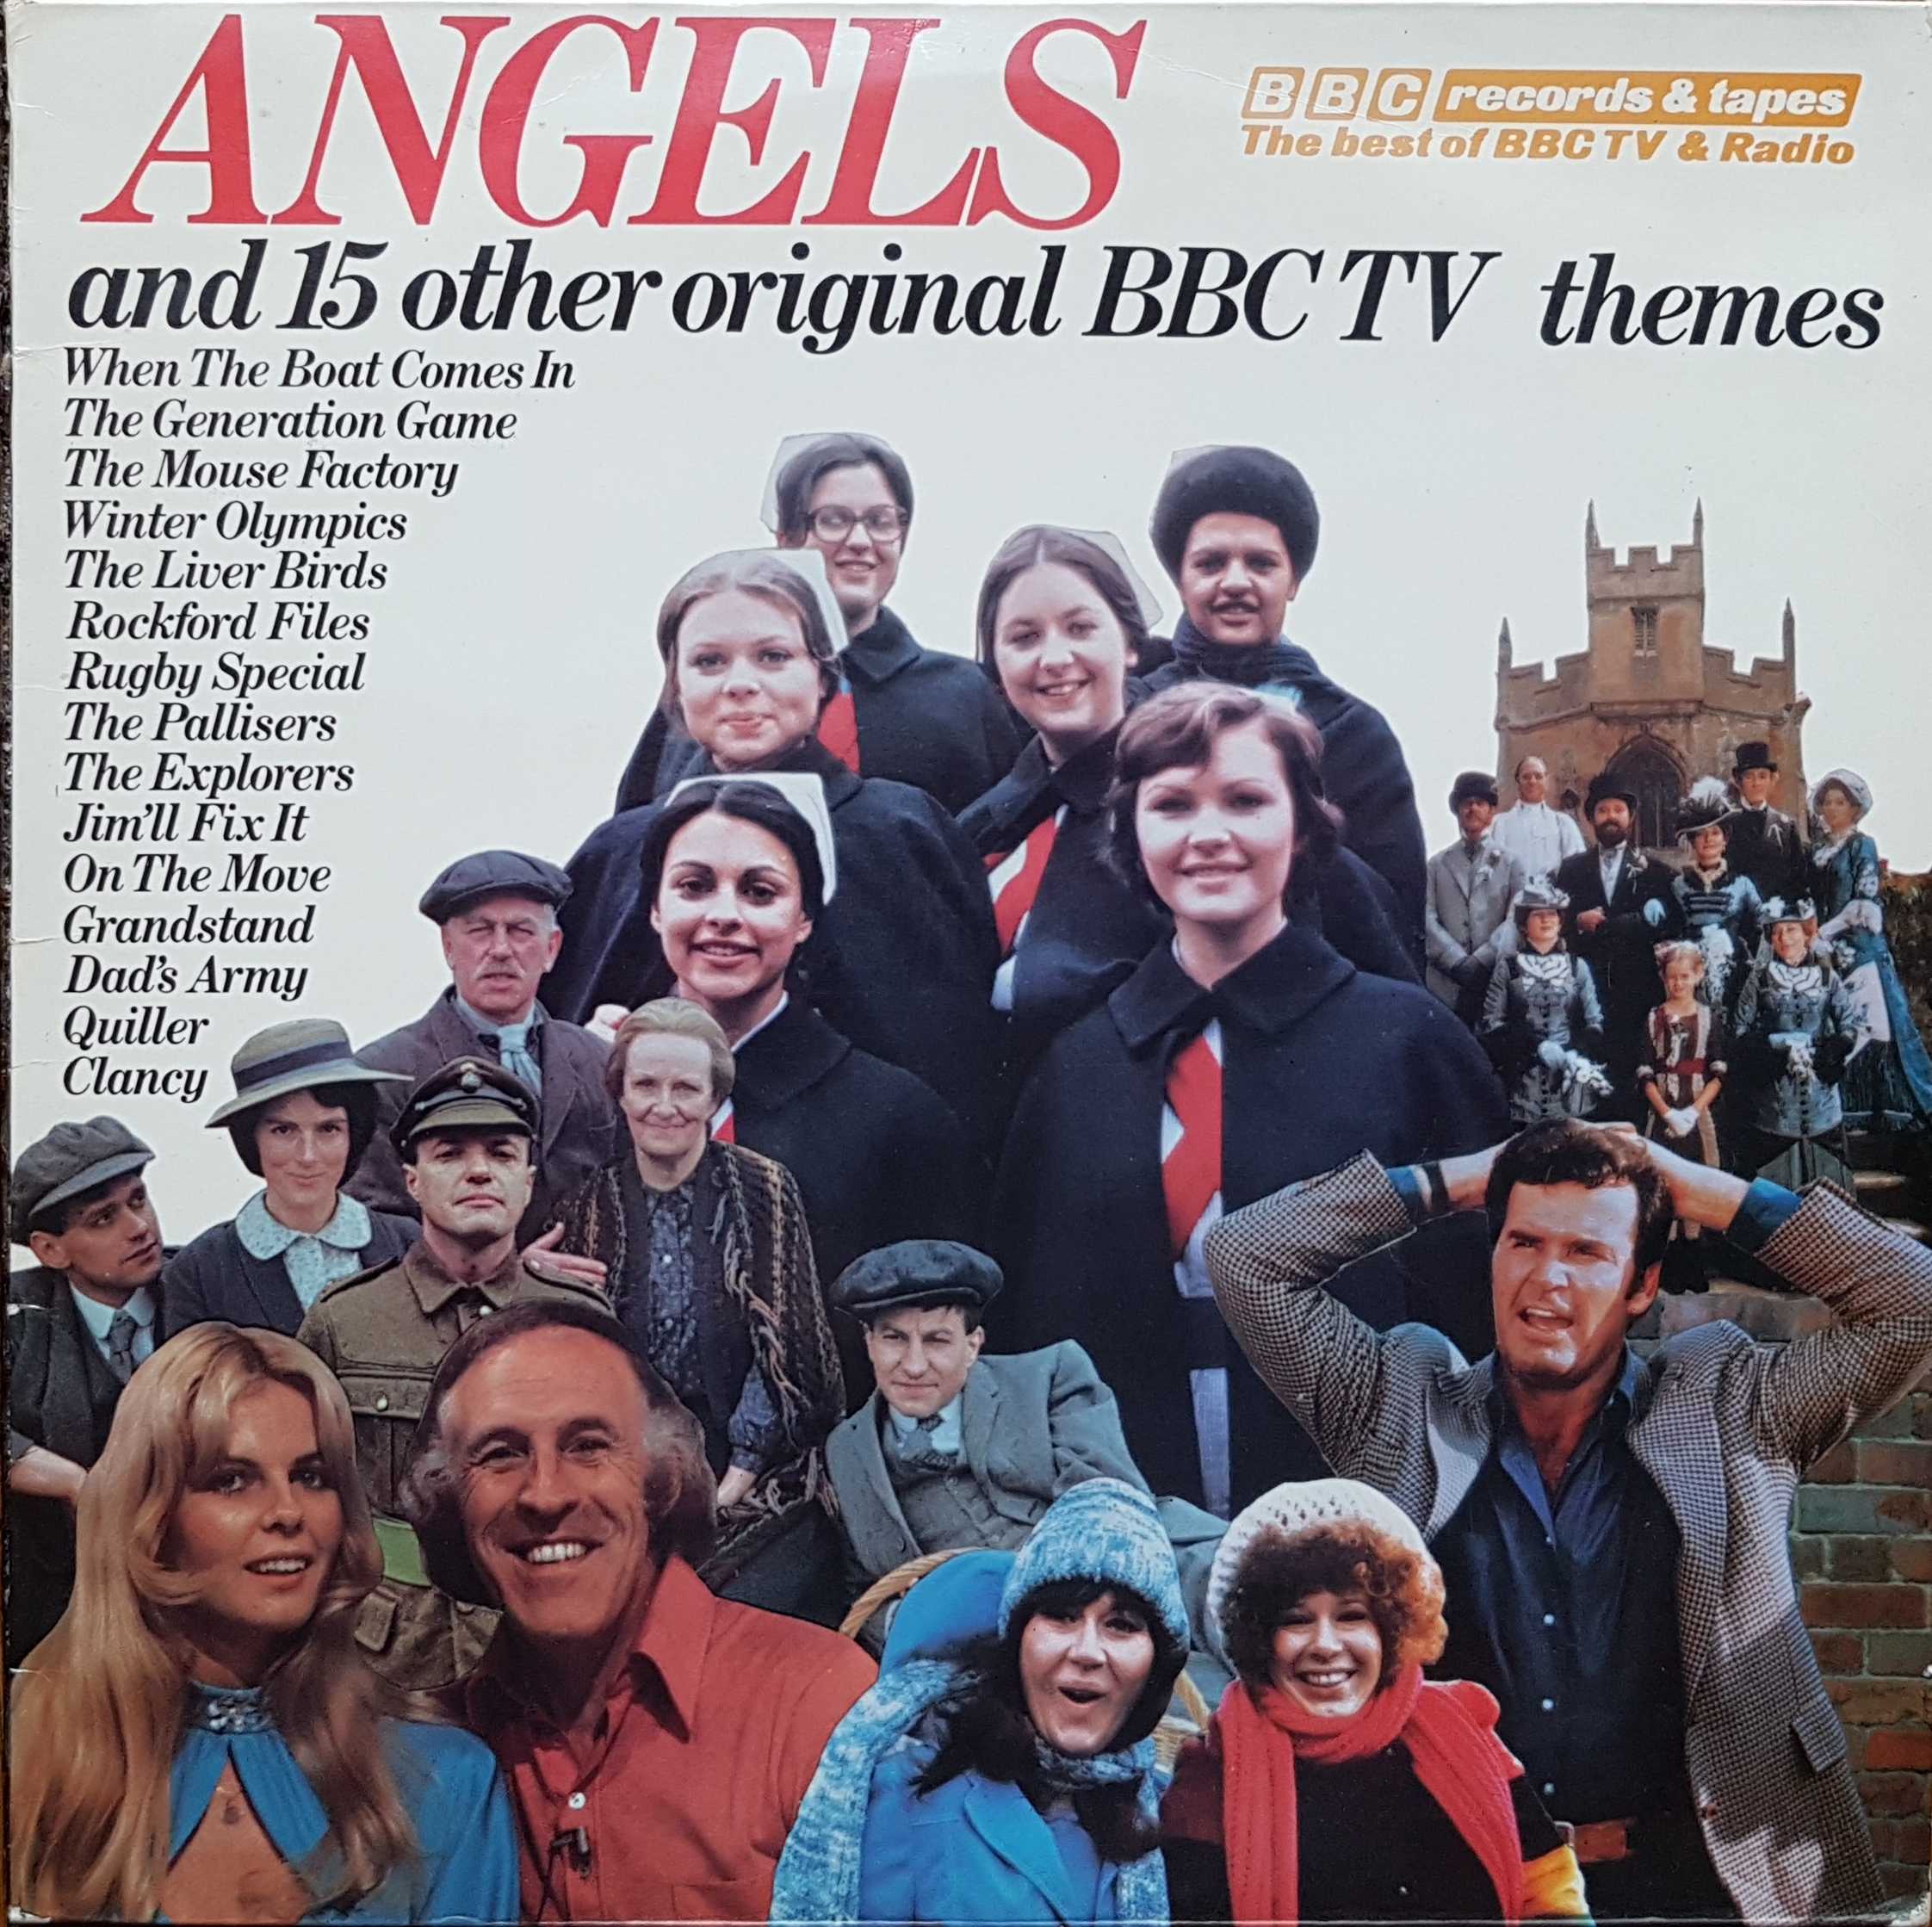 Picture of REB 236 Angels and 15 other original BBC TV themes by artist Various from the BBC albums - Records and Tapes library